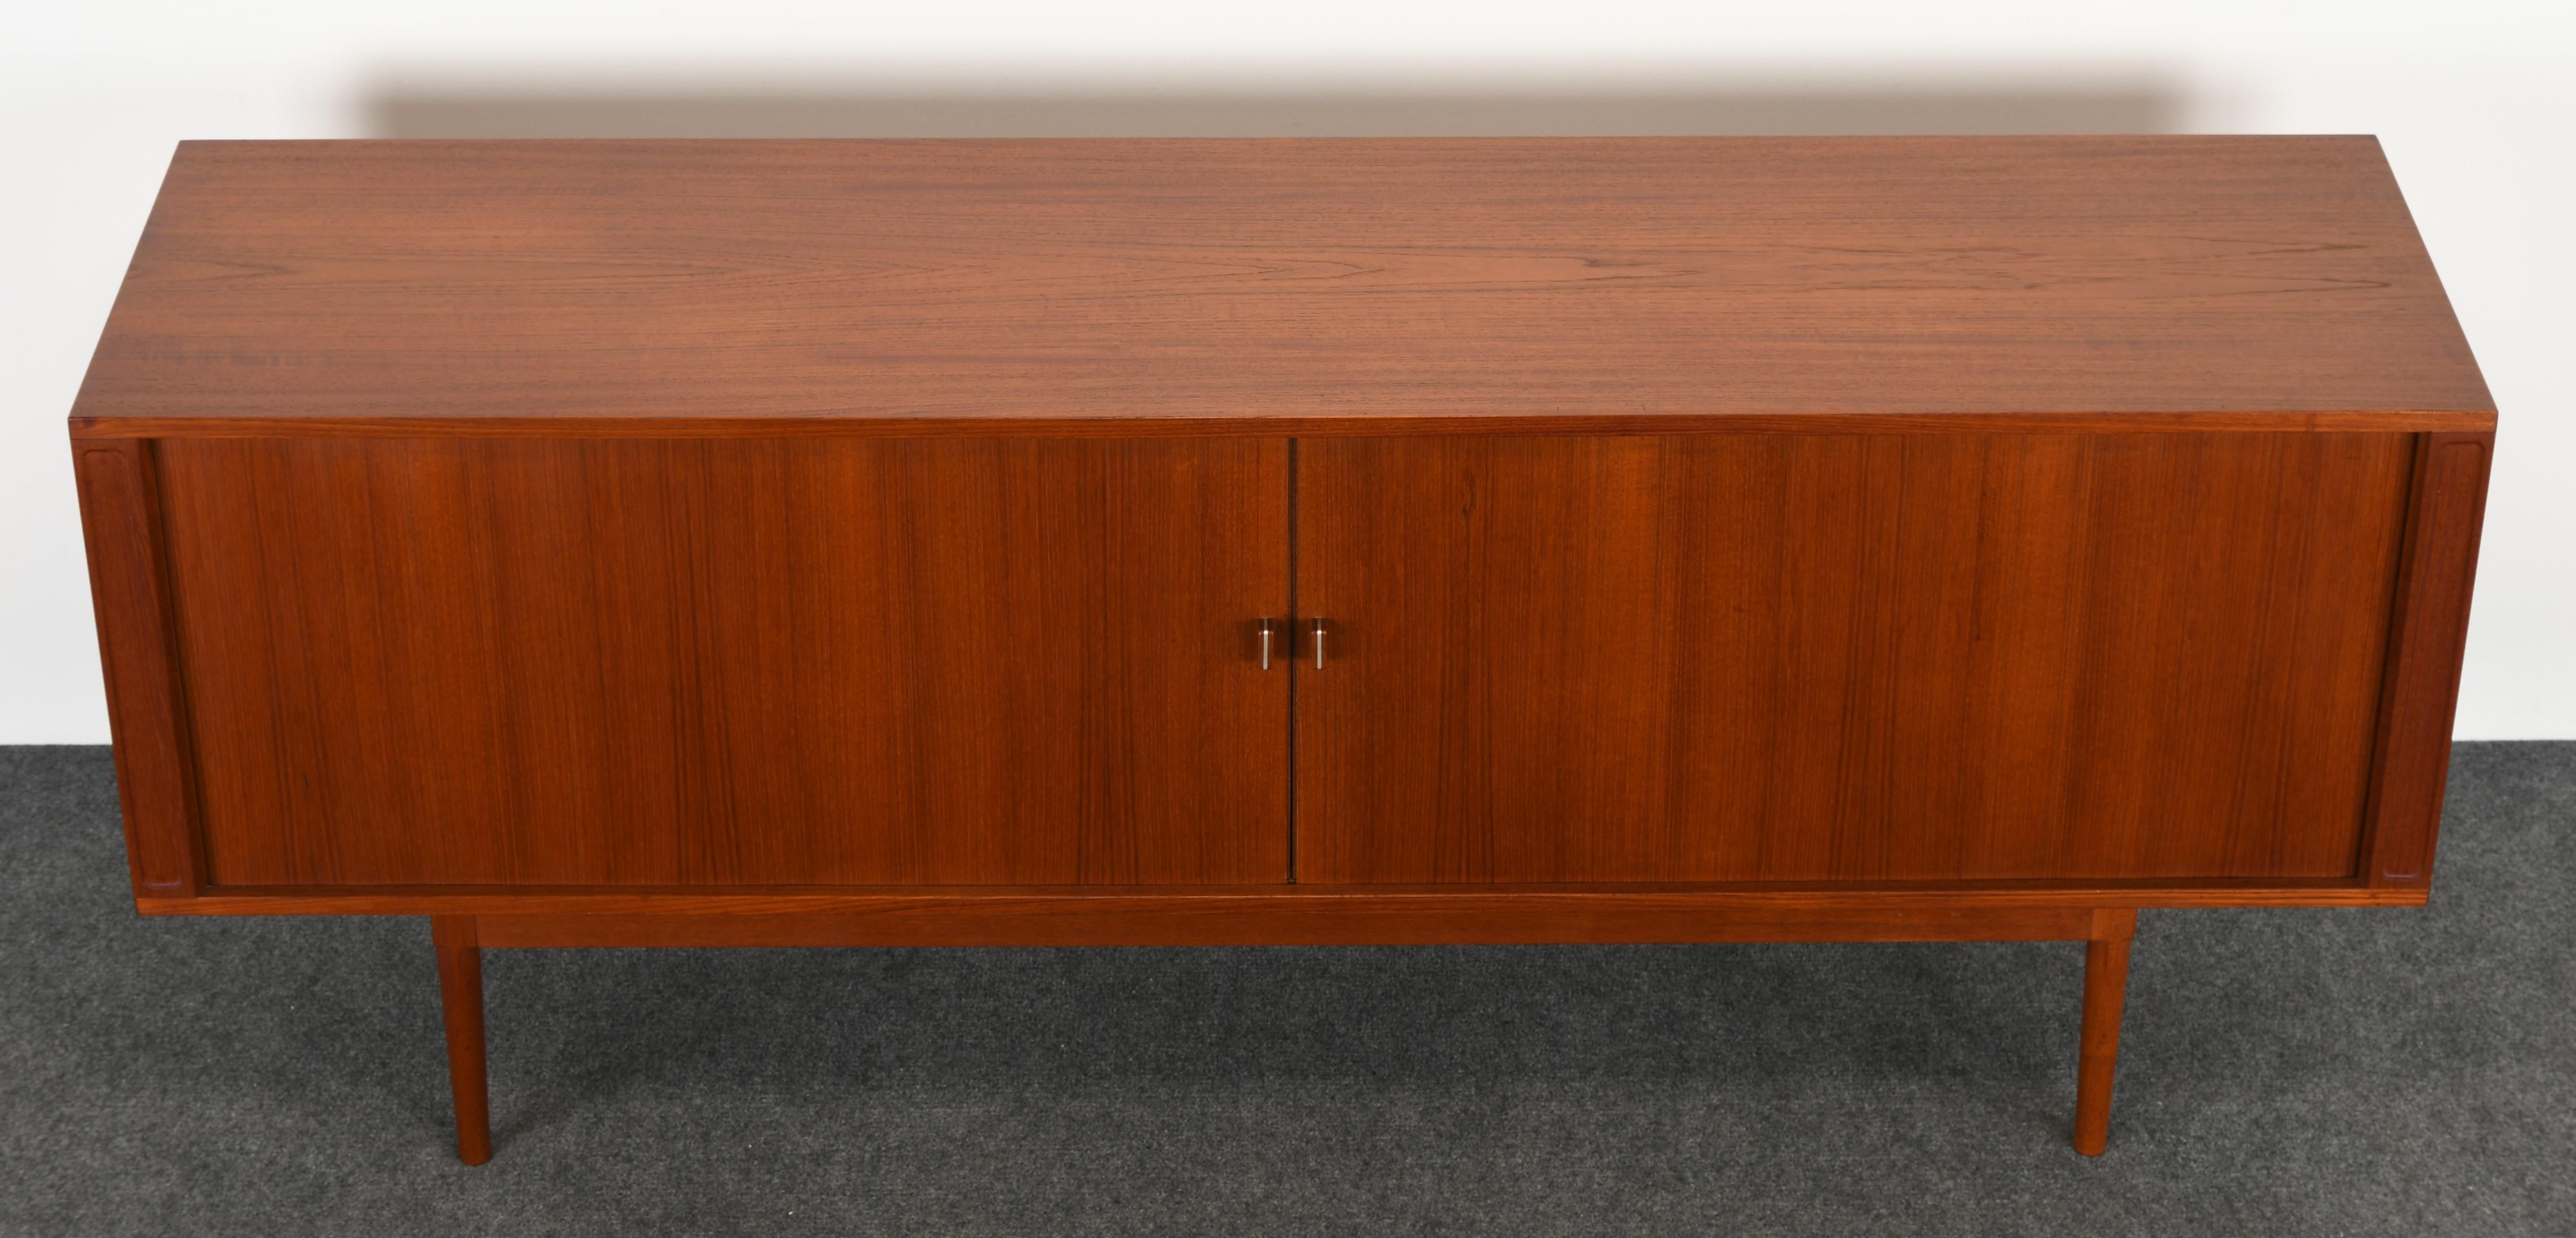 A handsome teak credenza designed by Jens Quistgaard for Peter Lovig. This teak sideboard has two tambour doors that reveal five shelves and five drawers for ample storage. The cabinet has a tapered leg base and finished back so it can be displayed